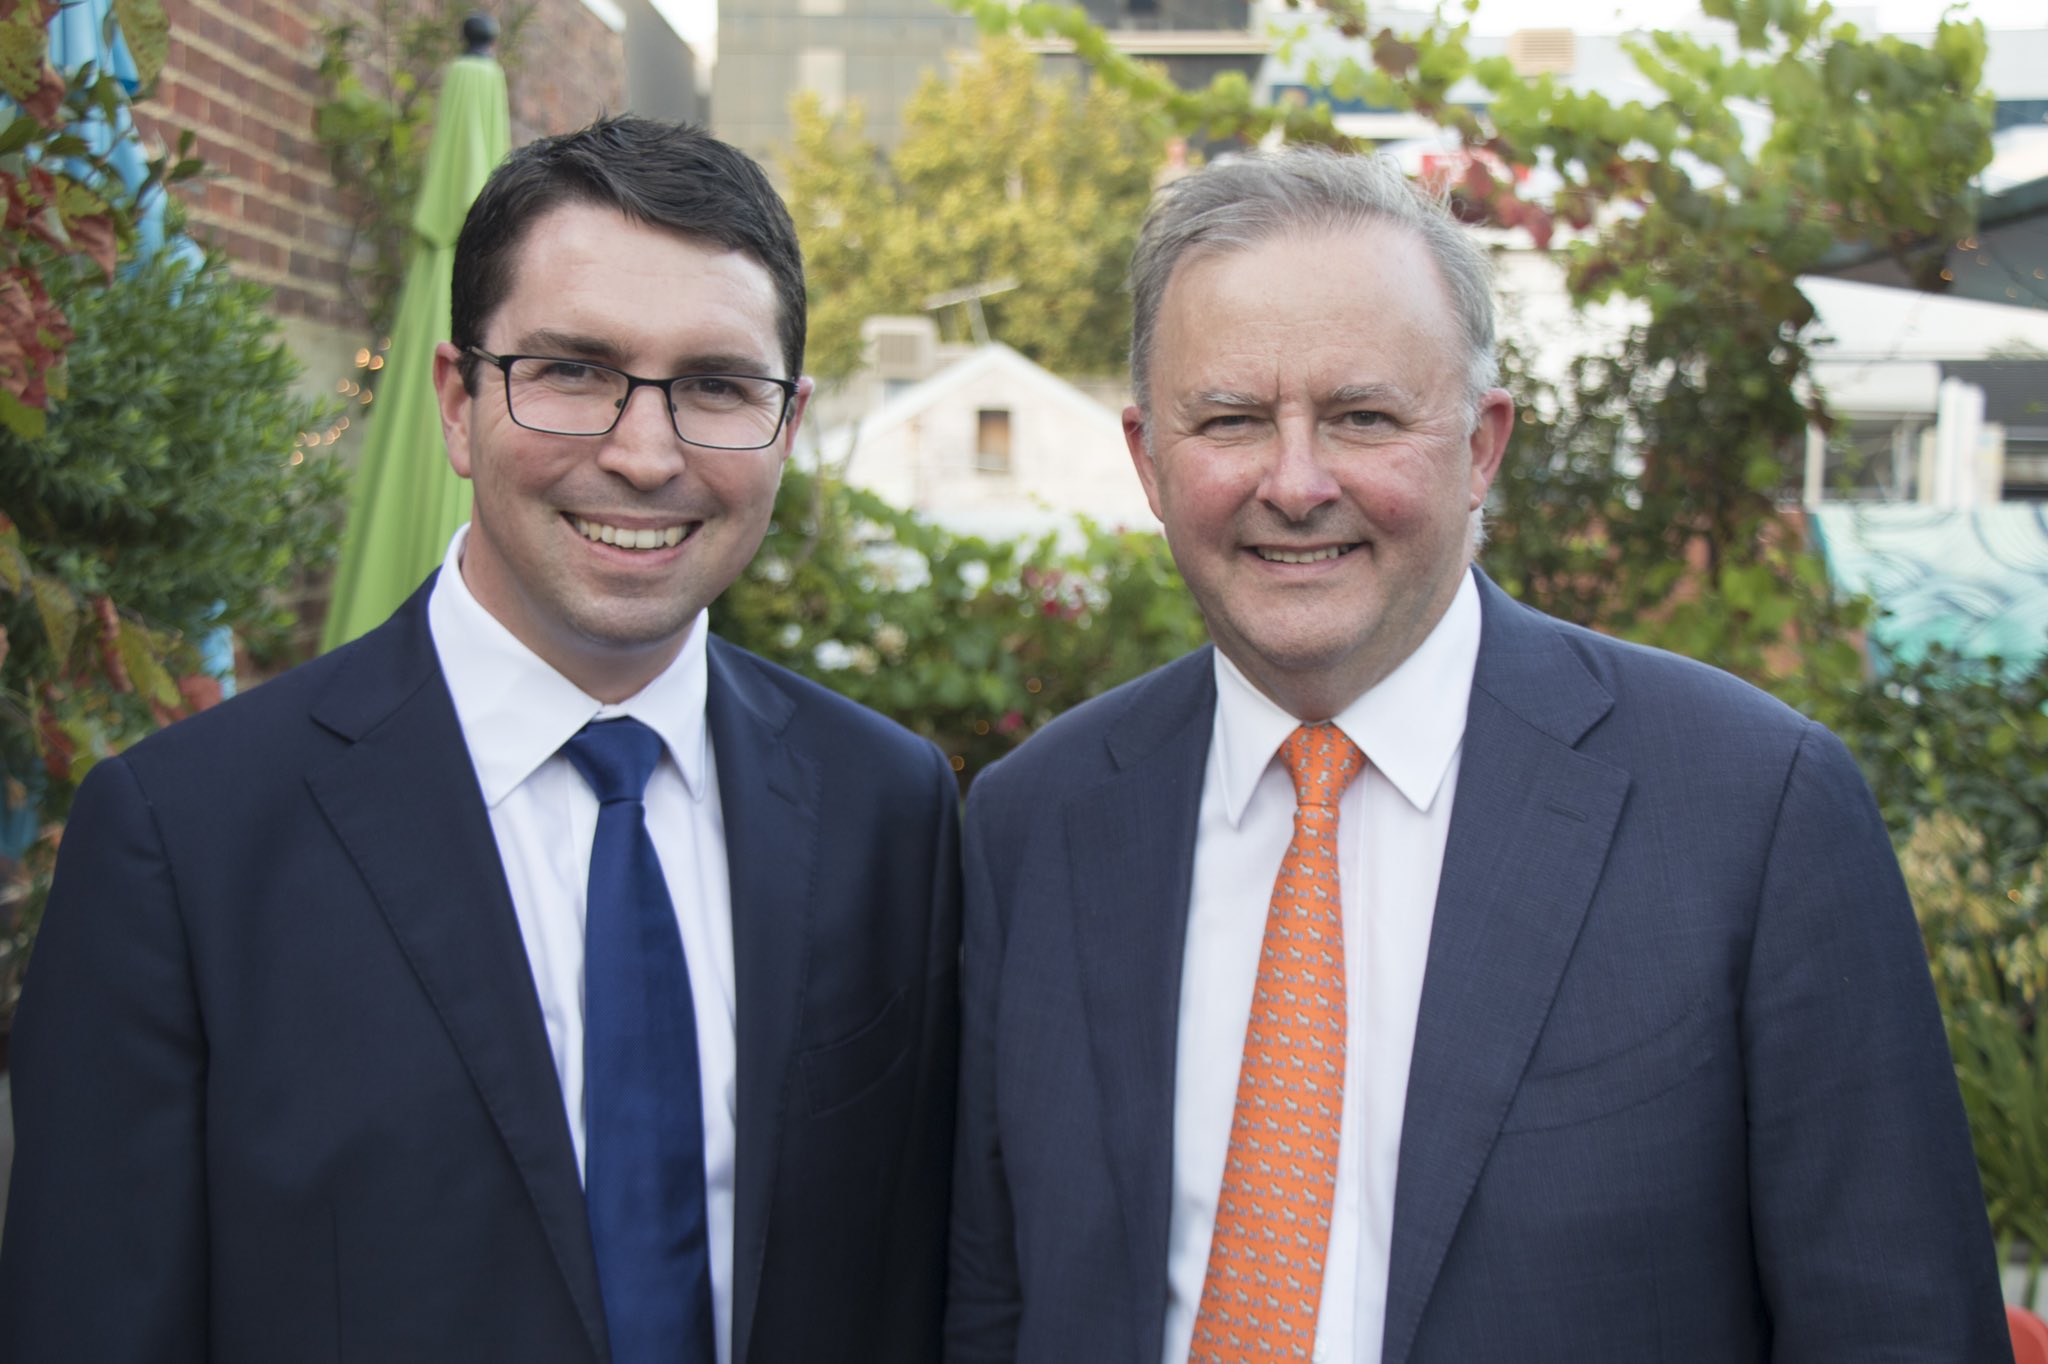 “Albo is the best person to capture the imagination of WA”: Patrick Gorman